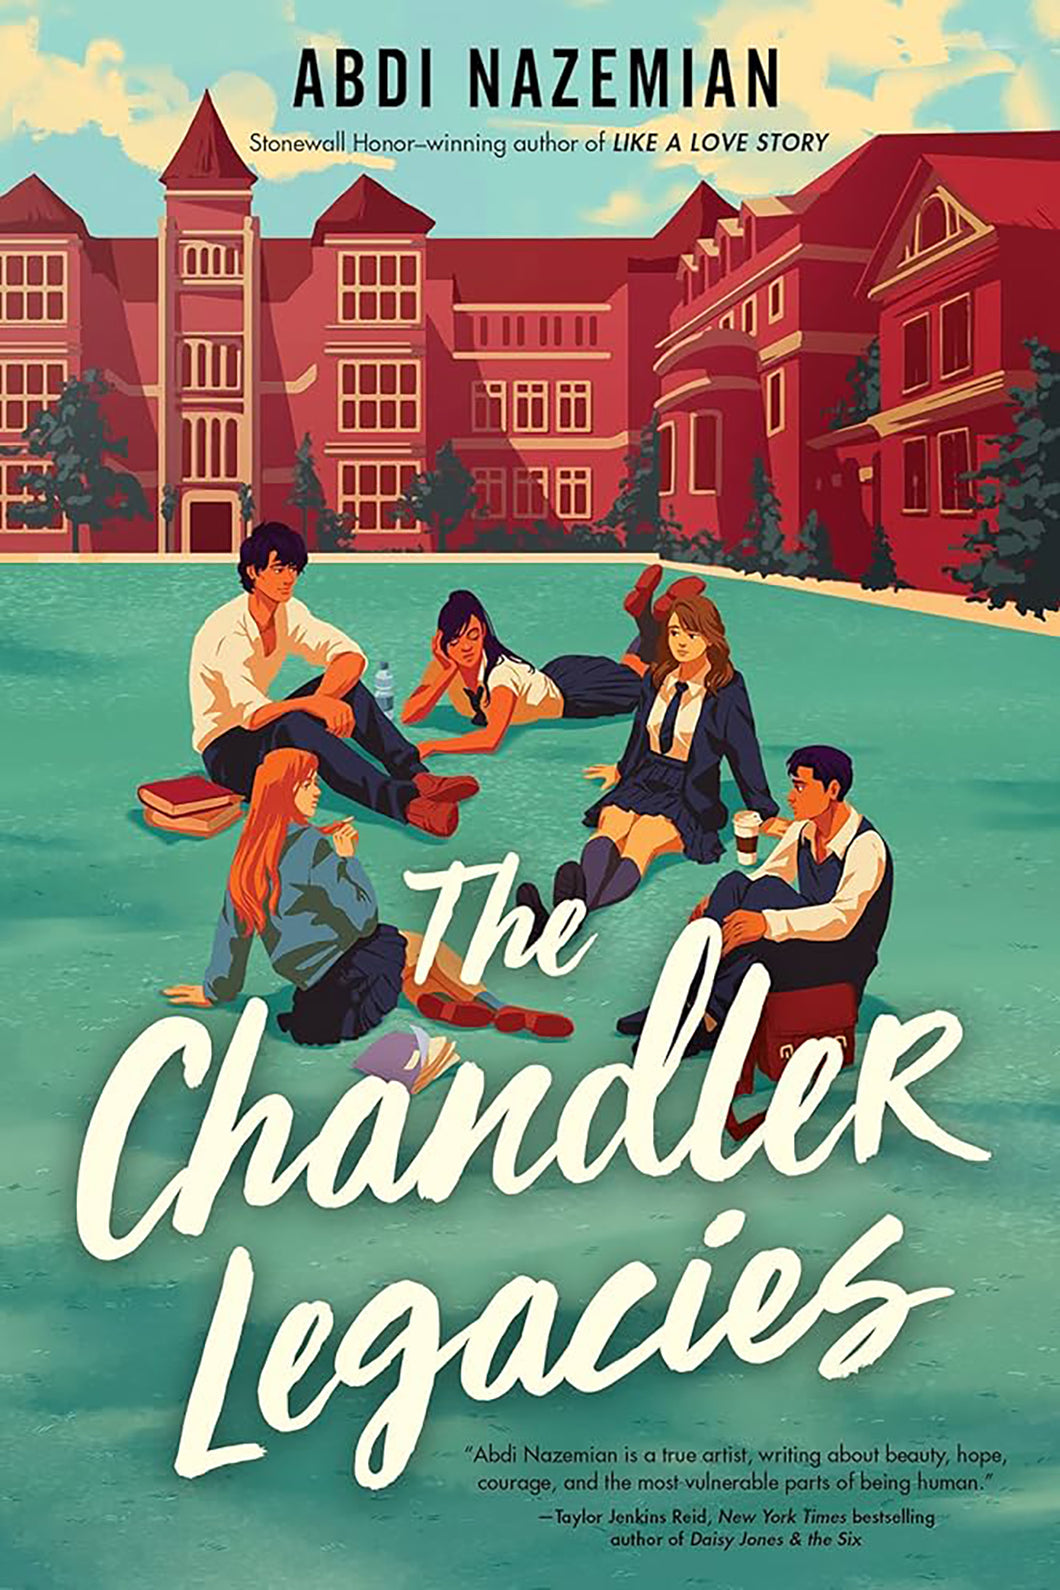 The Chandler Legacies by Abdi Nazemian / Hardcover or Paperback - NEW BOOK